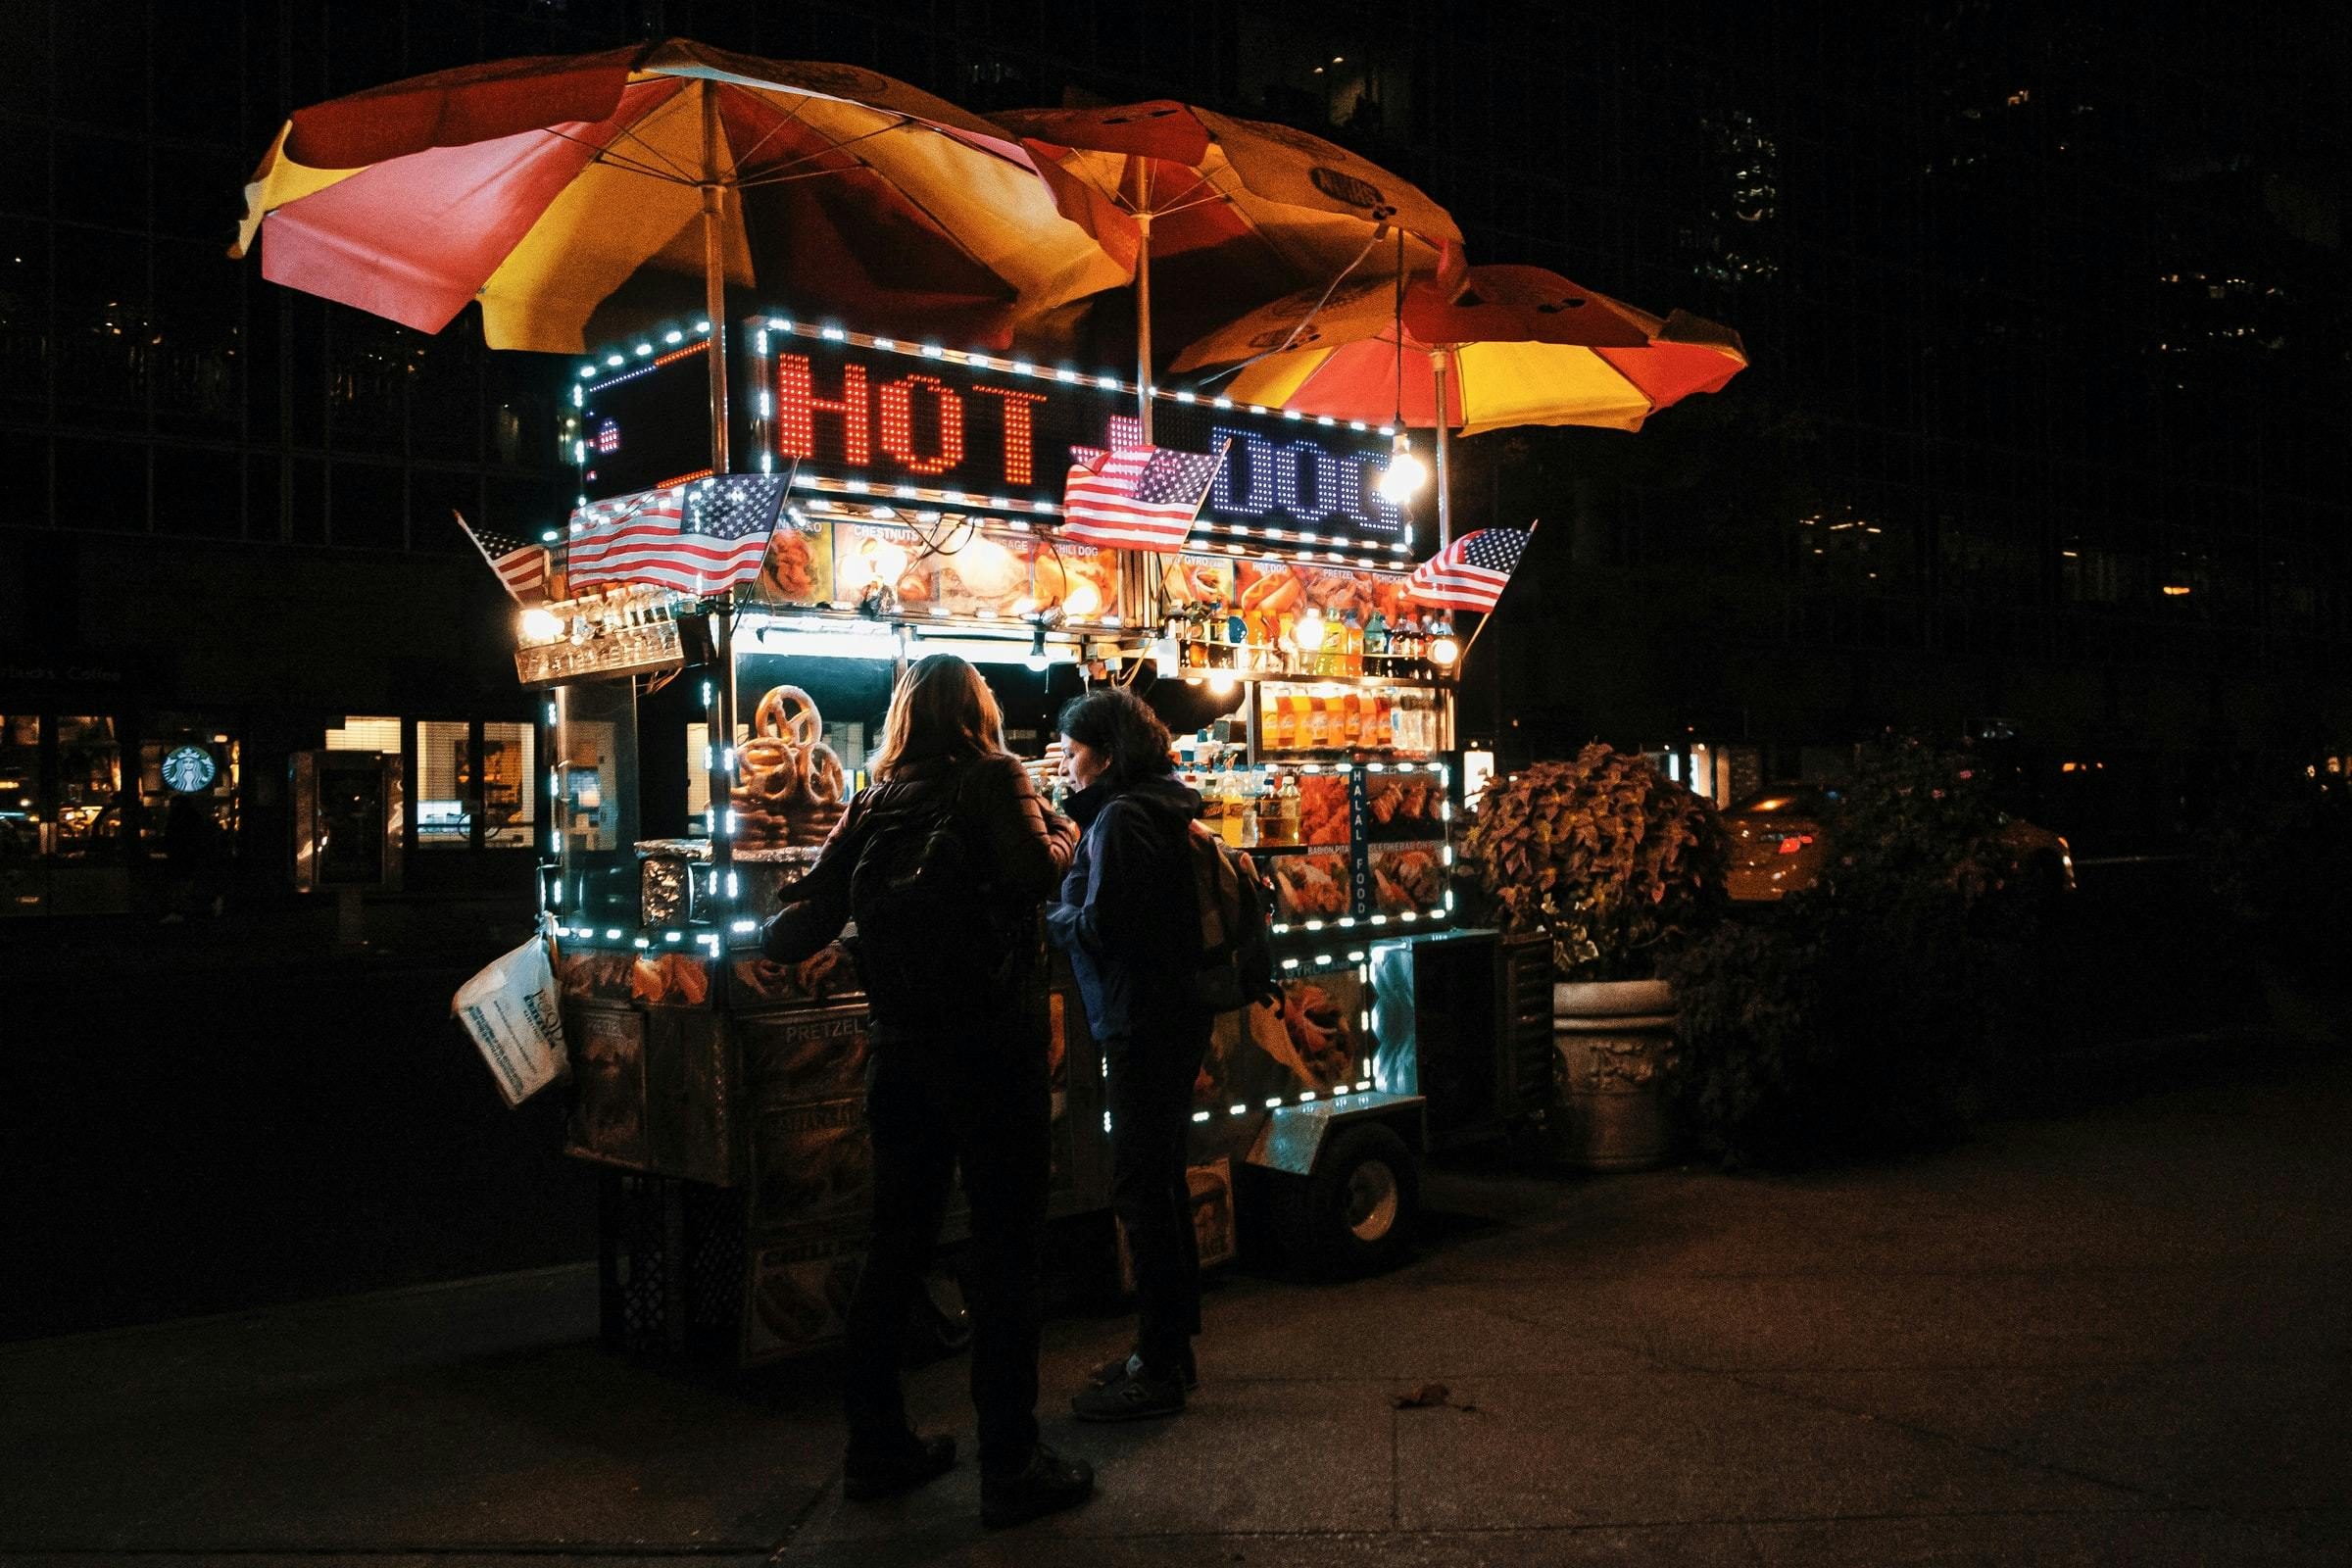 Our chili dogs are the best! Stop by The Hot Dog King's Carts in front, NYC Street Food